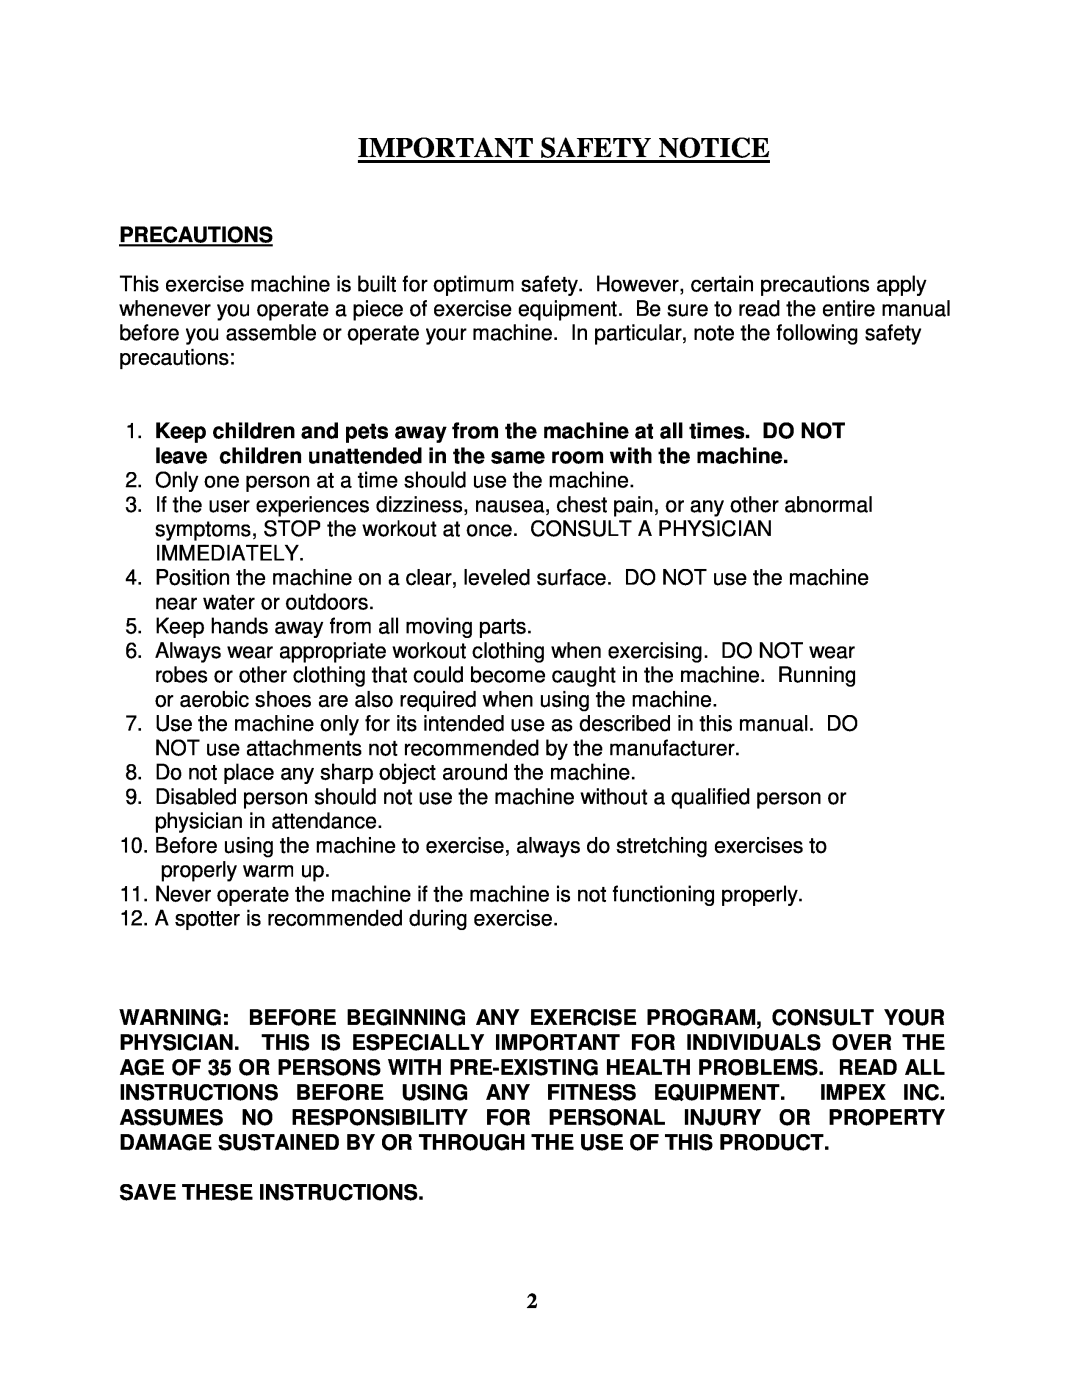 Impex MWB -558 manual Important Safety Notice, Precautions, Save These Instructions 